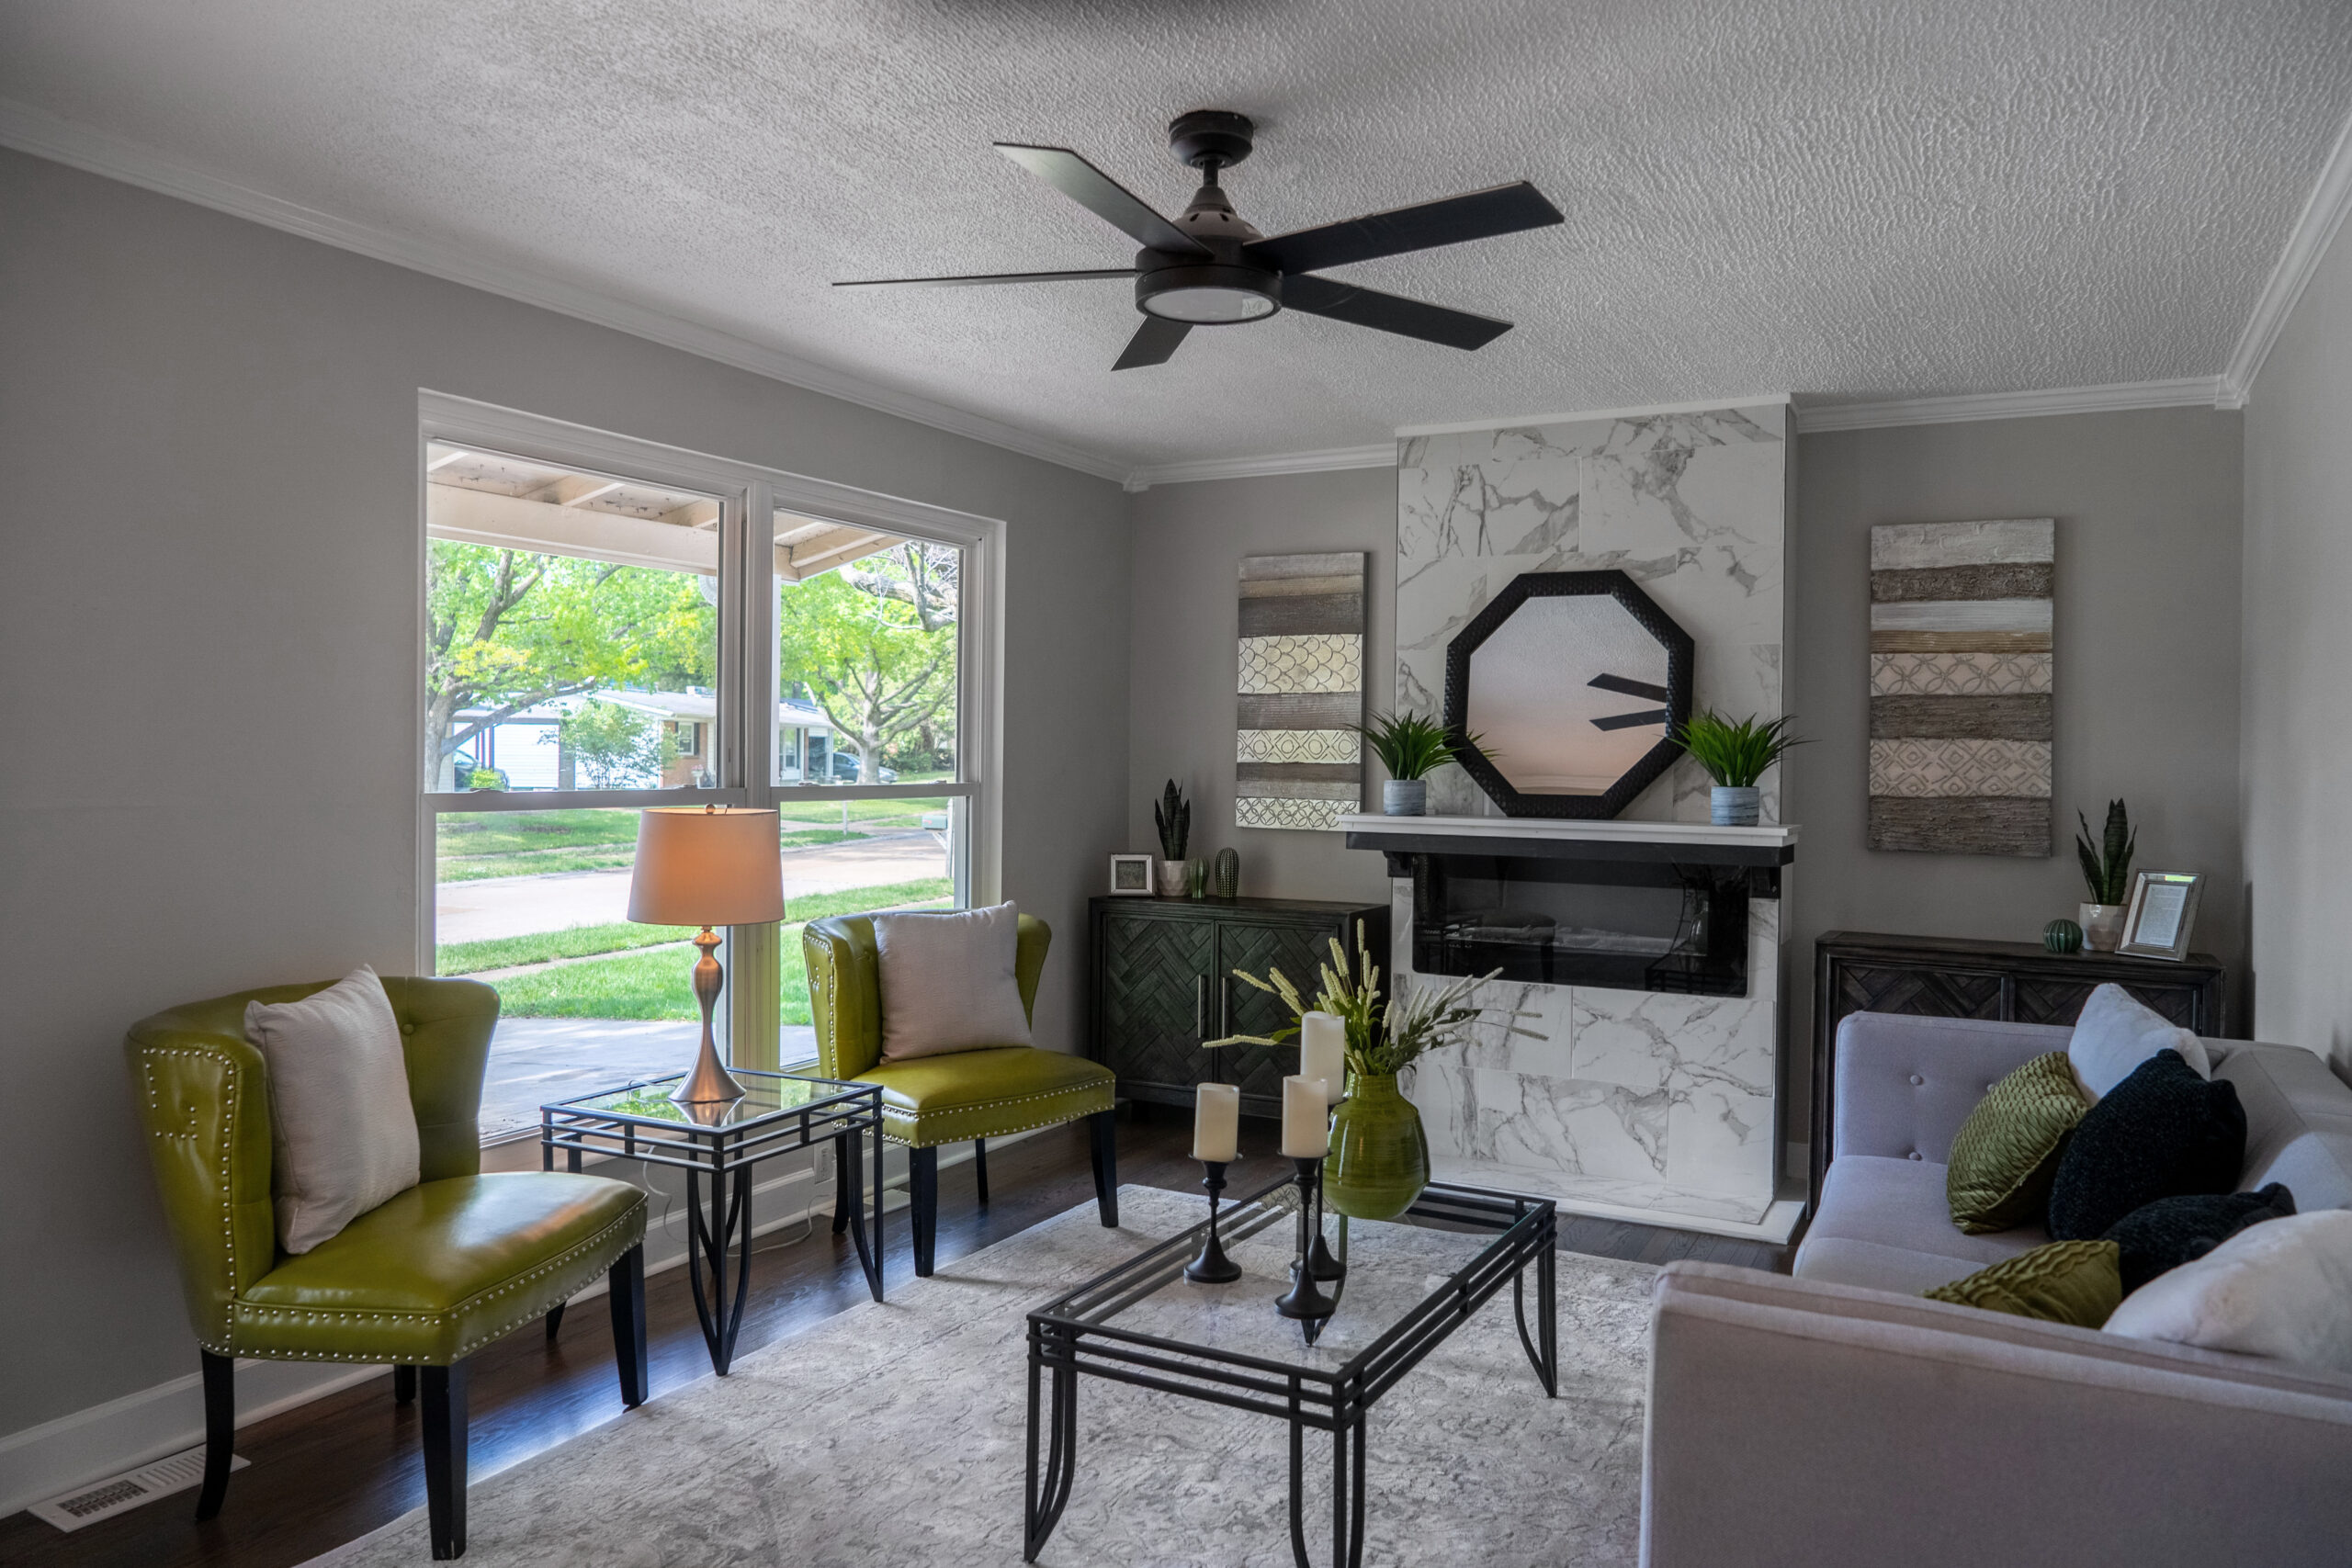 Staged living room of a home in Florissant, MO